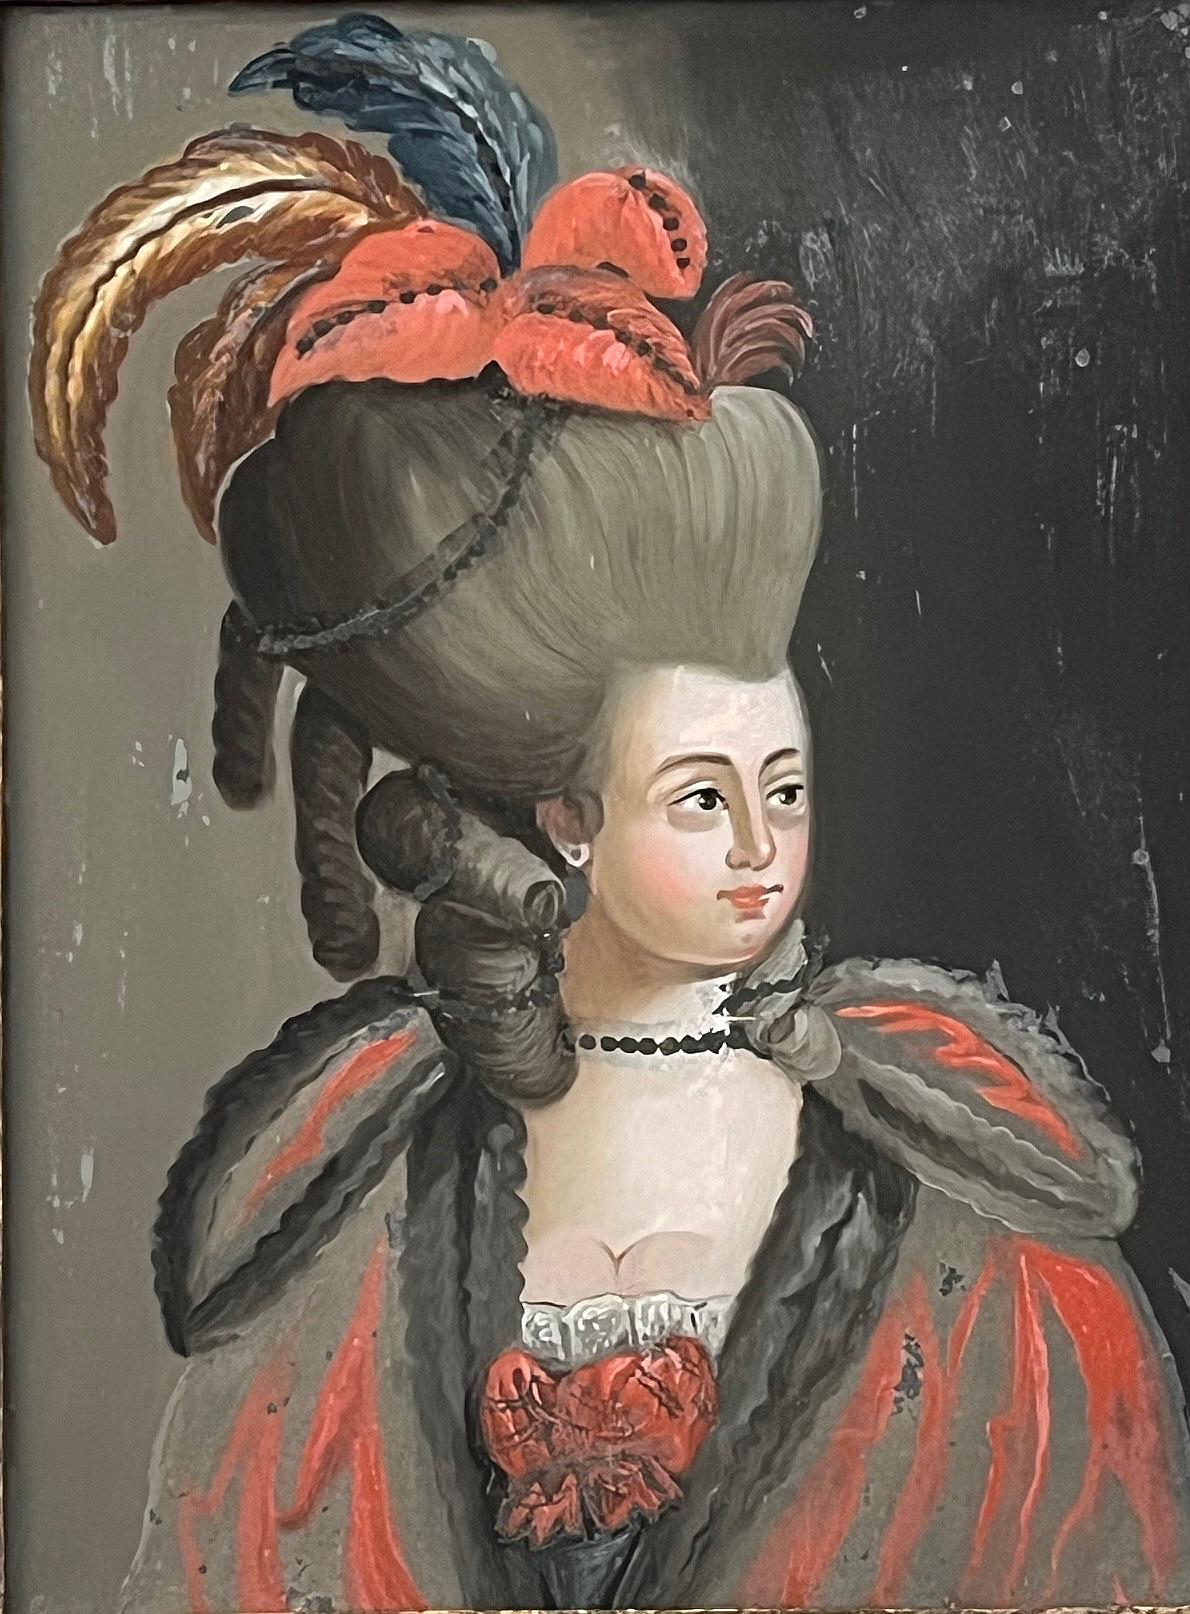 Hand-Carved Italian Reverse Glass Portrait Painting of a Fashionable Lady, Rome, circa 1775 For Sale